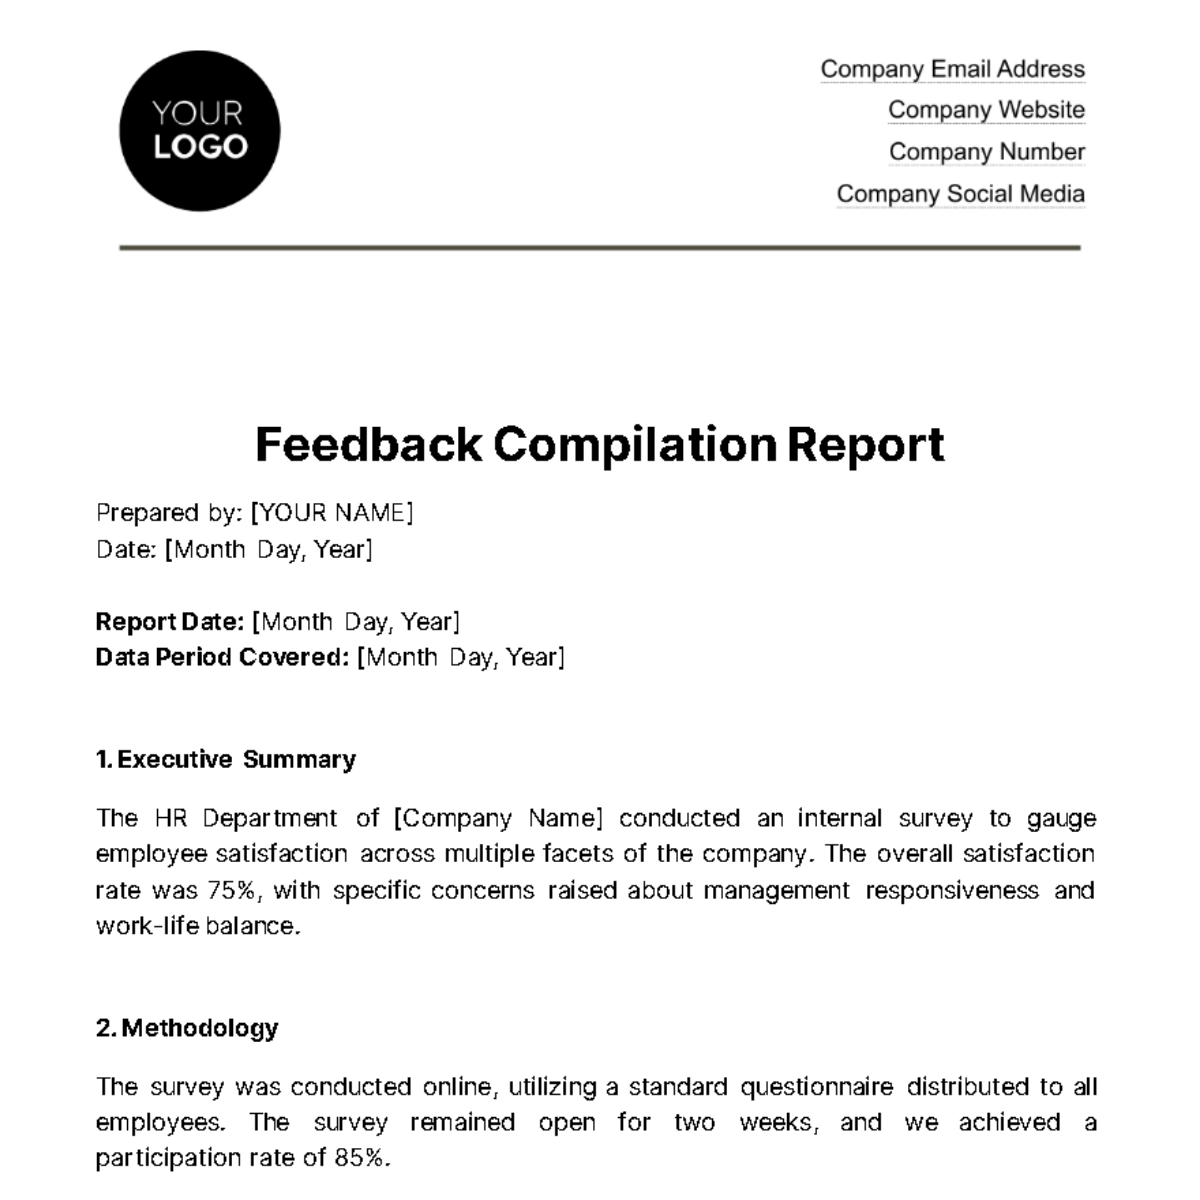 Feedback Compilation Report HR Template